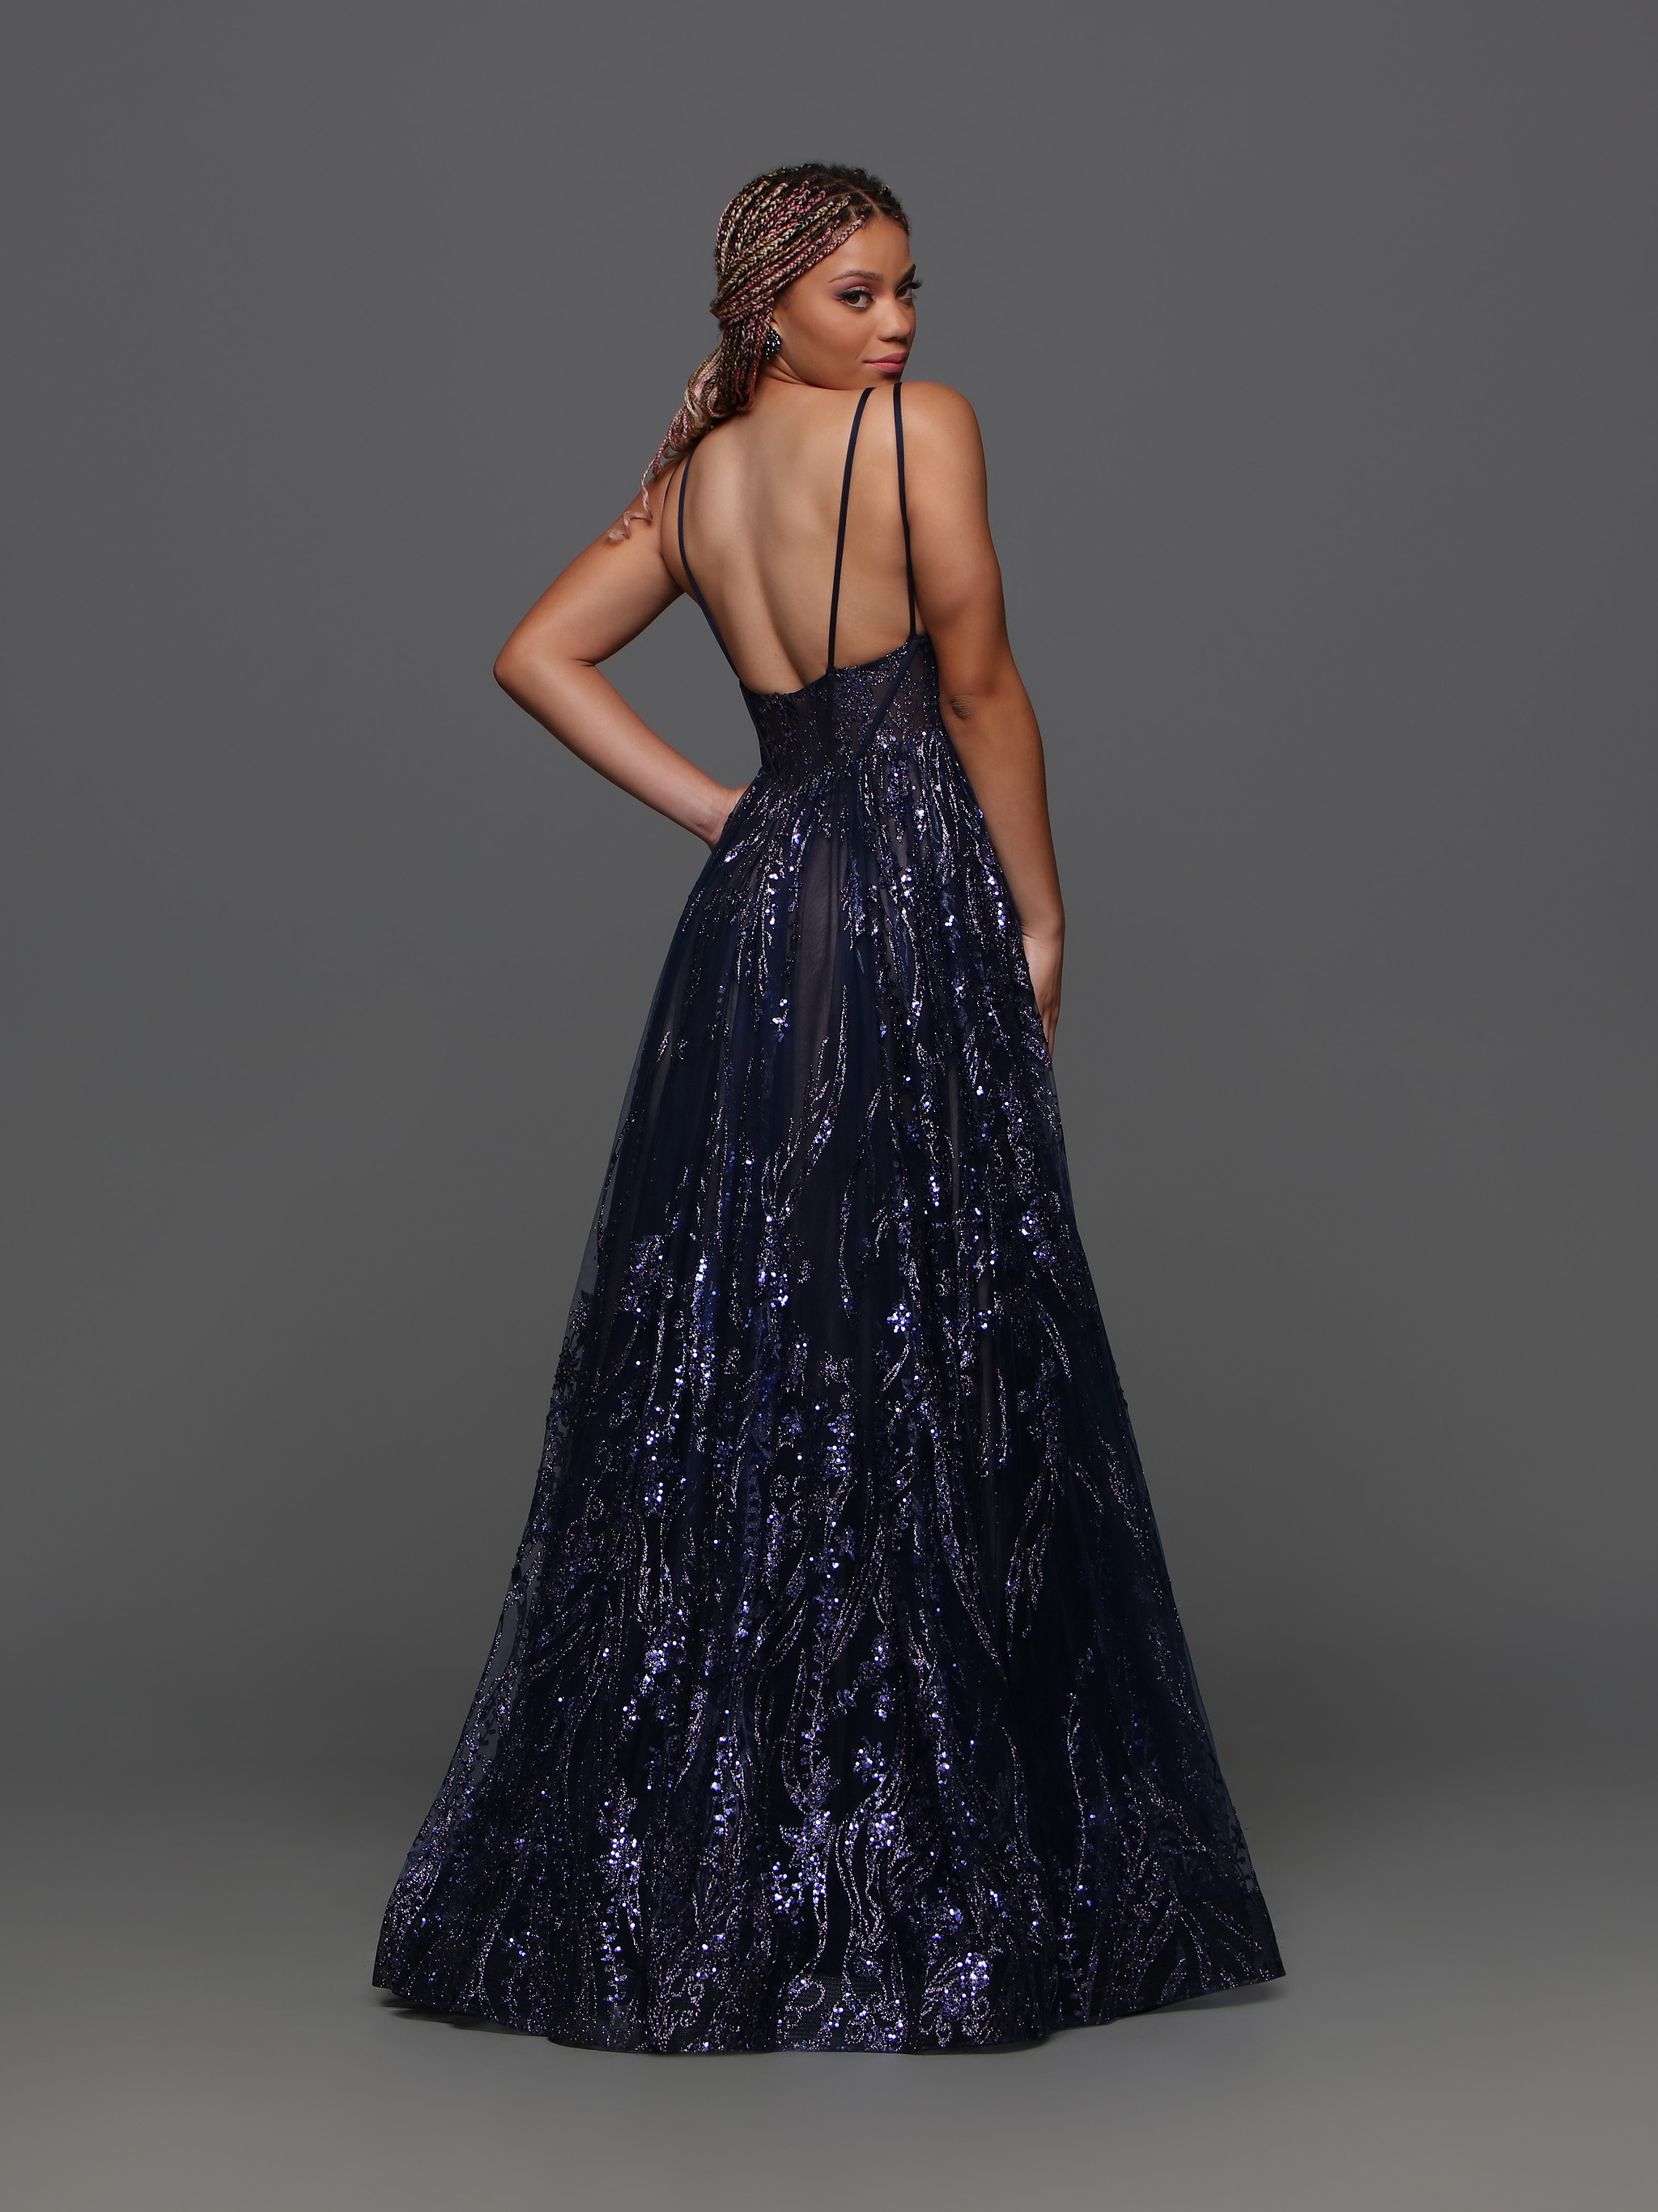 Back view of Style : 72329